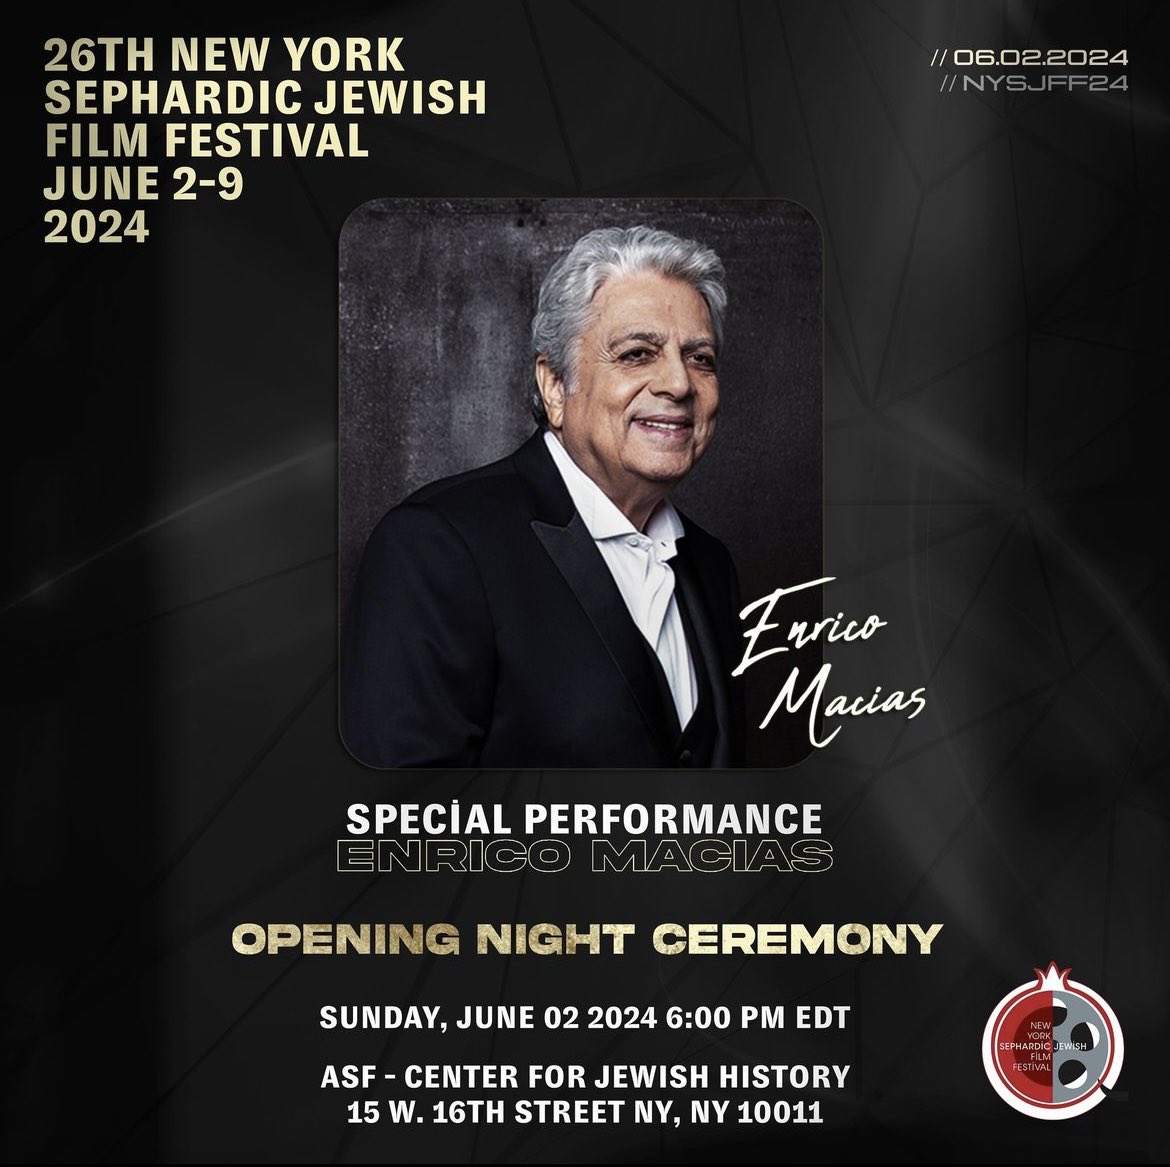 Join us on Opening Night for a mesmerizing performance by Enrico Macias, who is returning to the American stage after 4 years away, hand in hand with the American Sephardi Federation. Come and see the legend whose performance should be savored like wine. In-between major